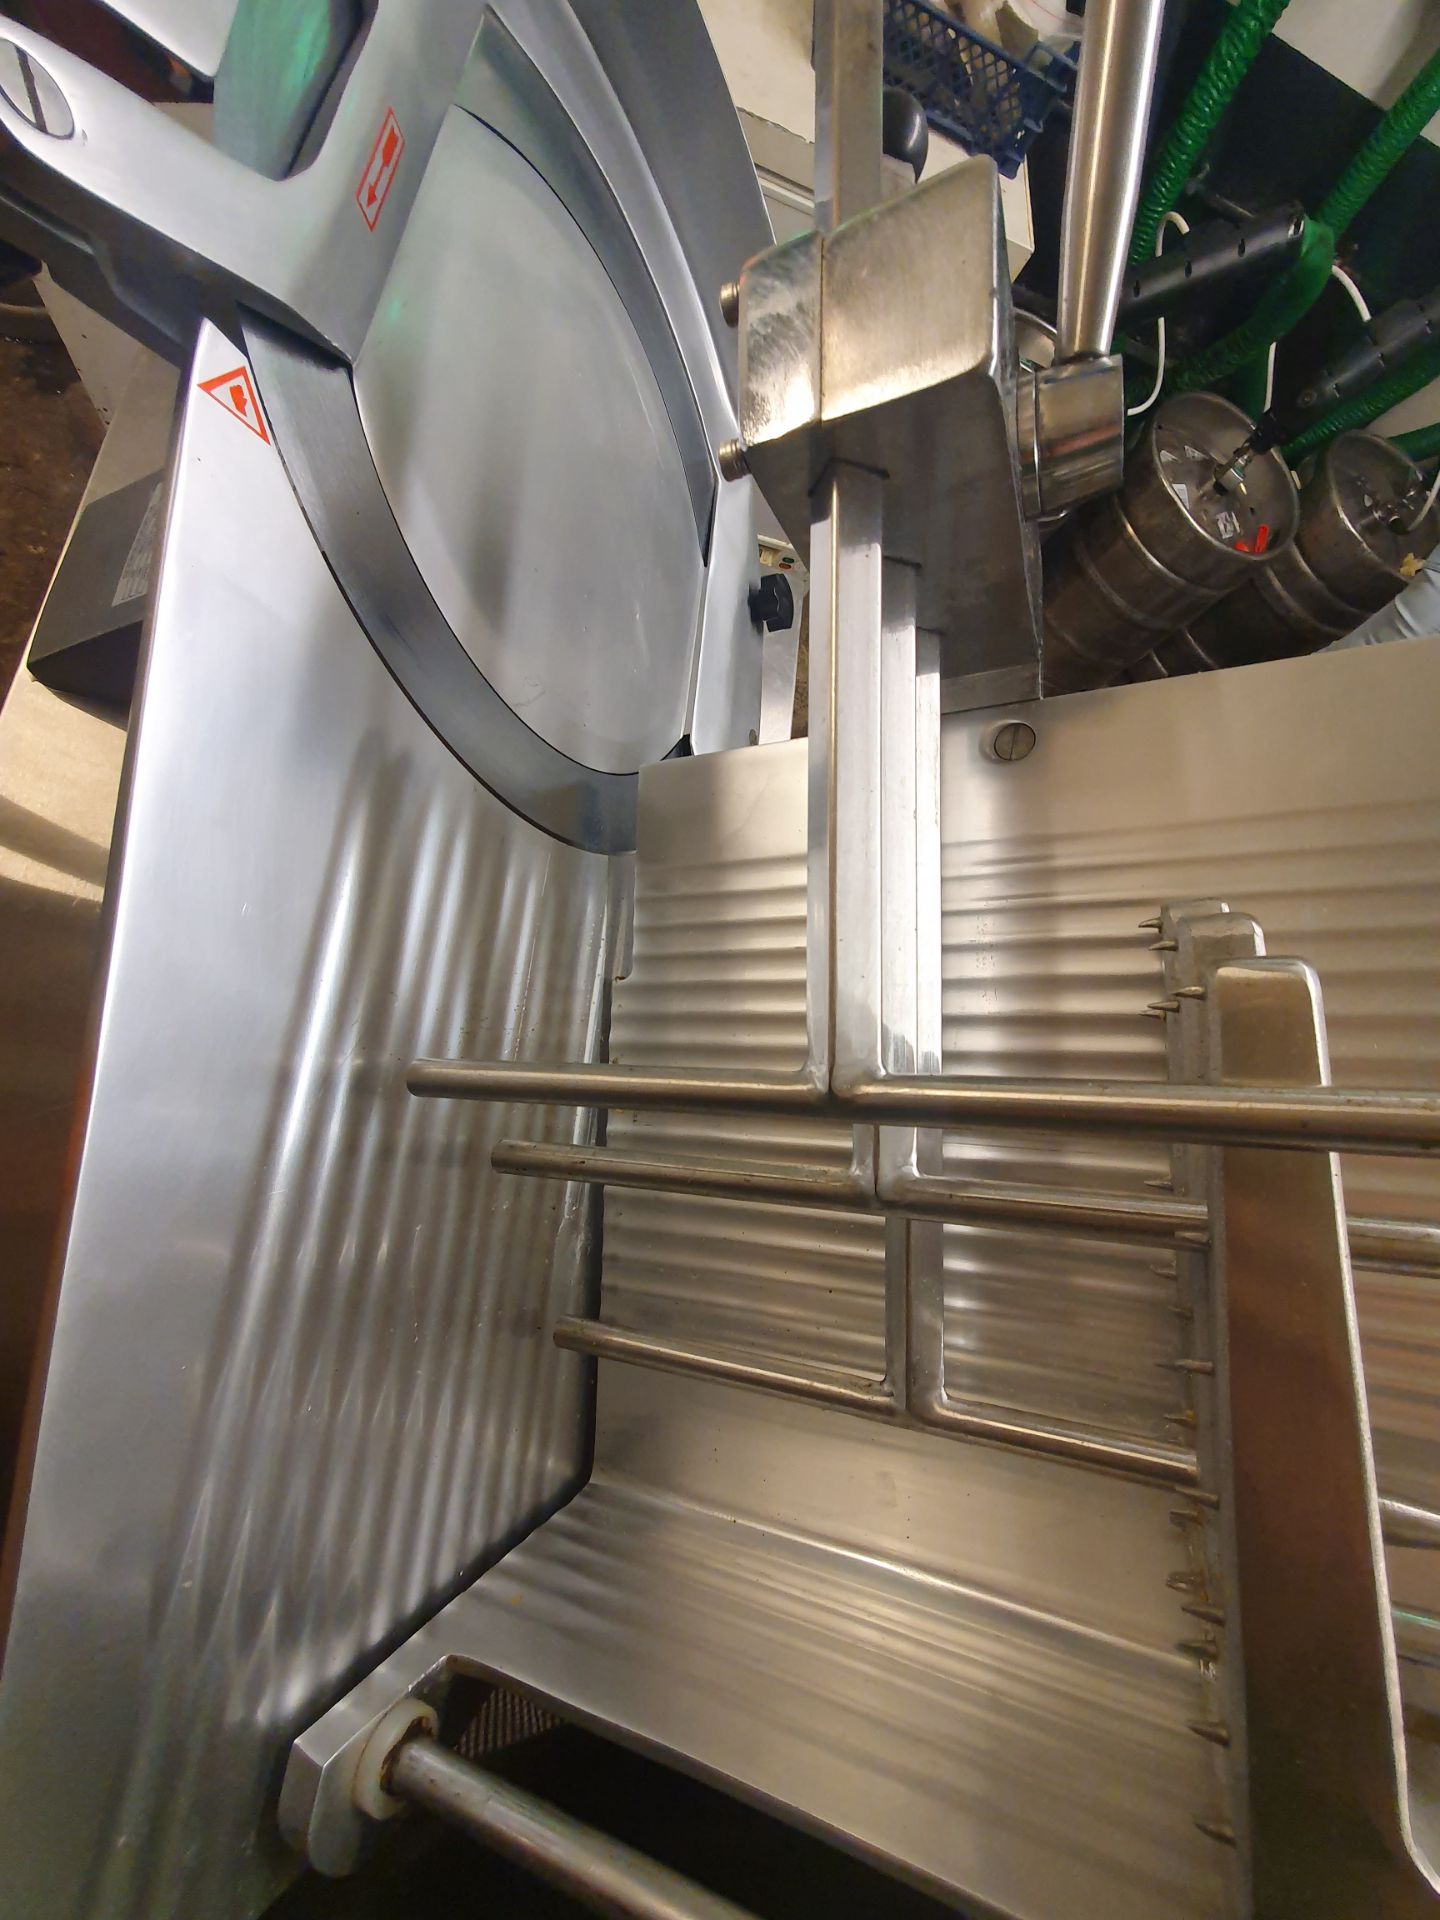 Large Automatic Meat Slicer. - Image 10 of 13